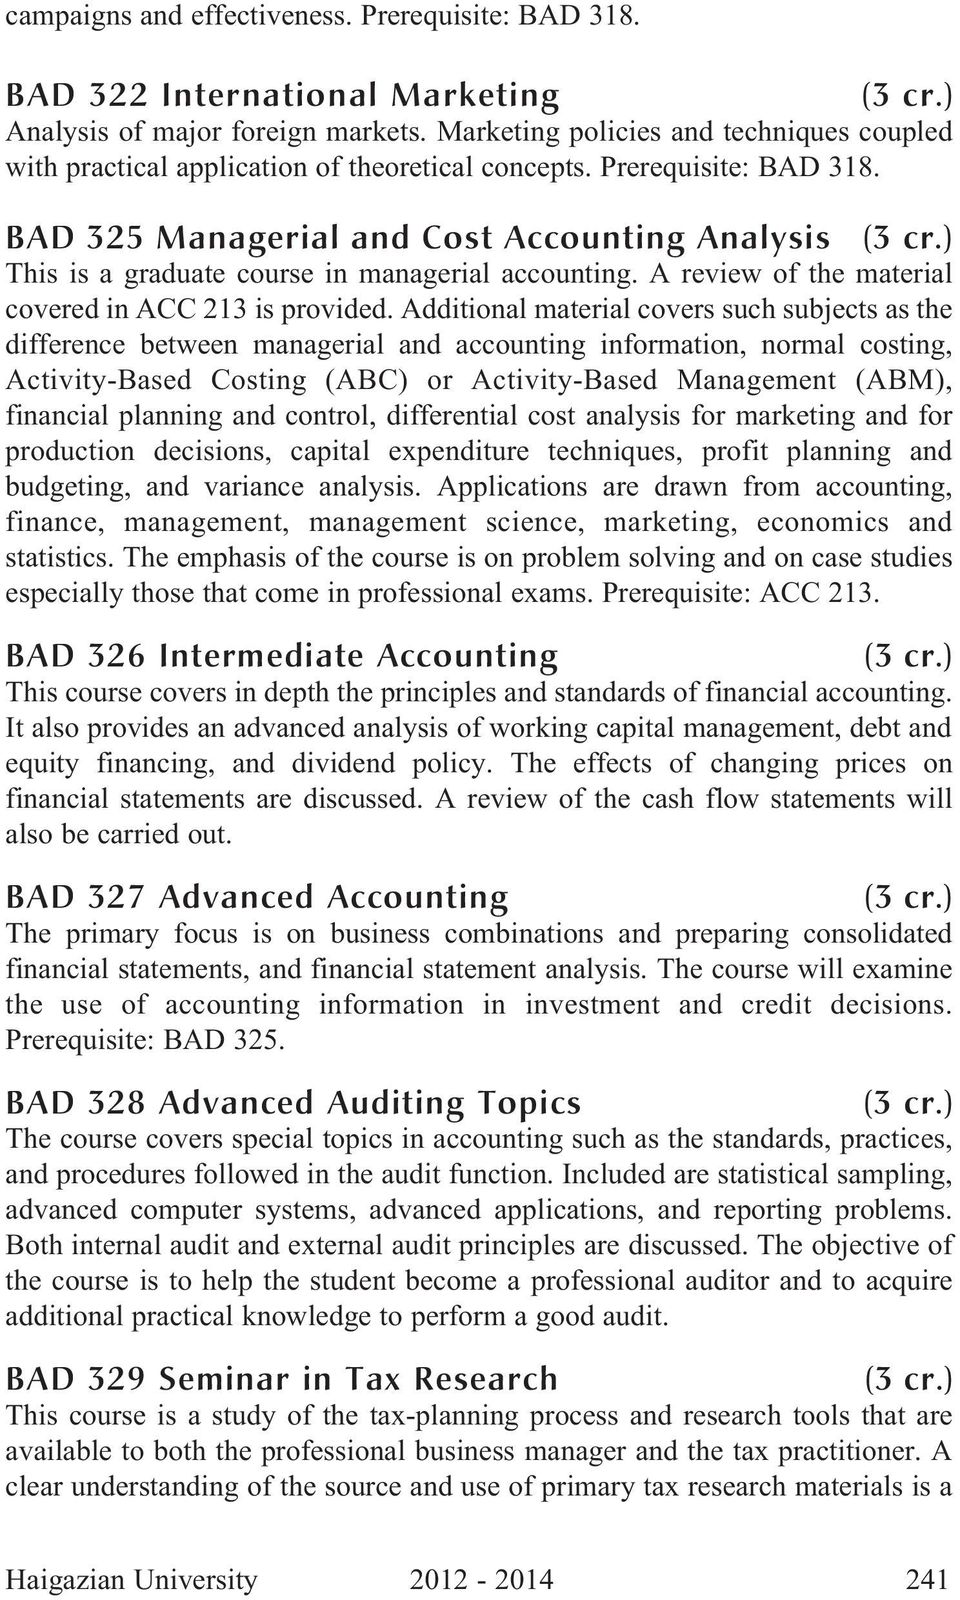 BAD 325 Managerial and Cost Accounting Analysis () This is a graduate course in managerial accounting. A review of the material covered in ACC 213 is provided.